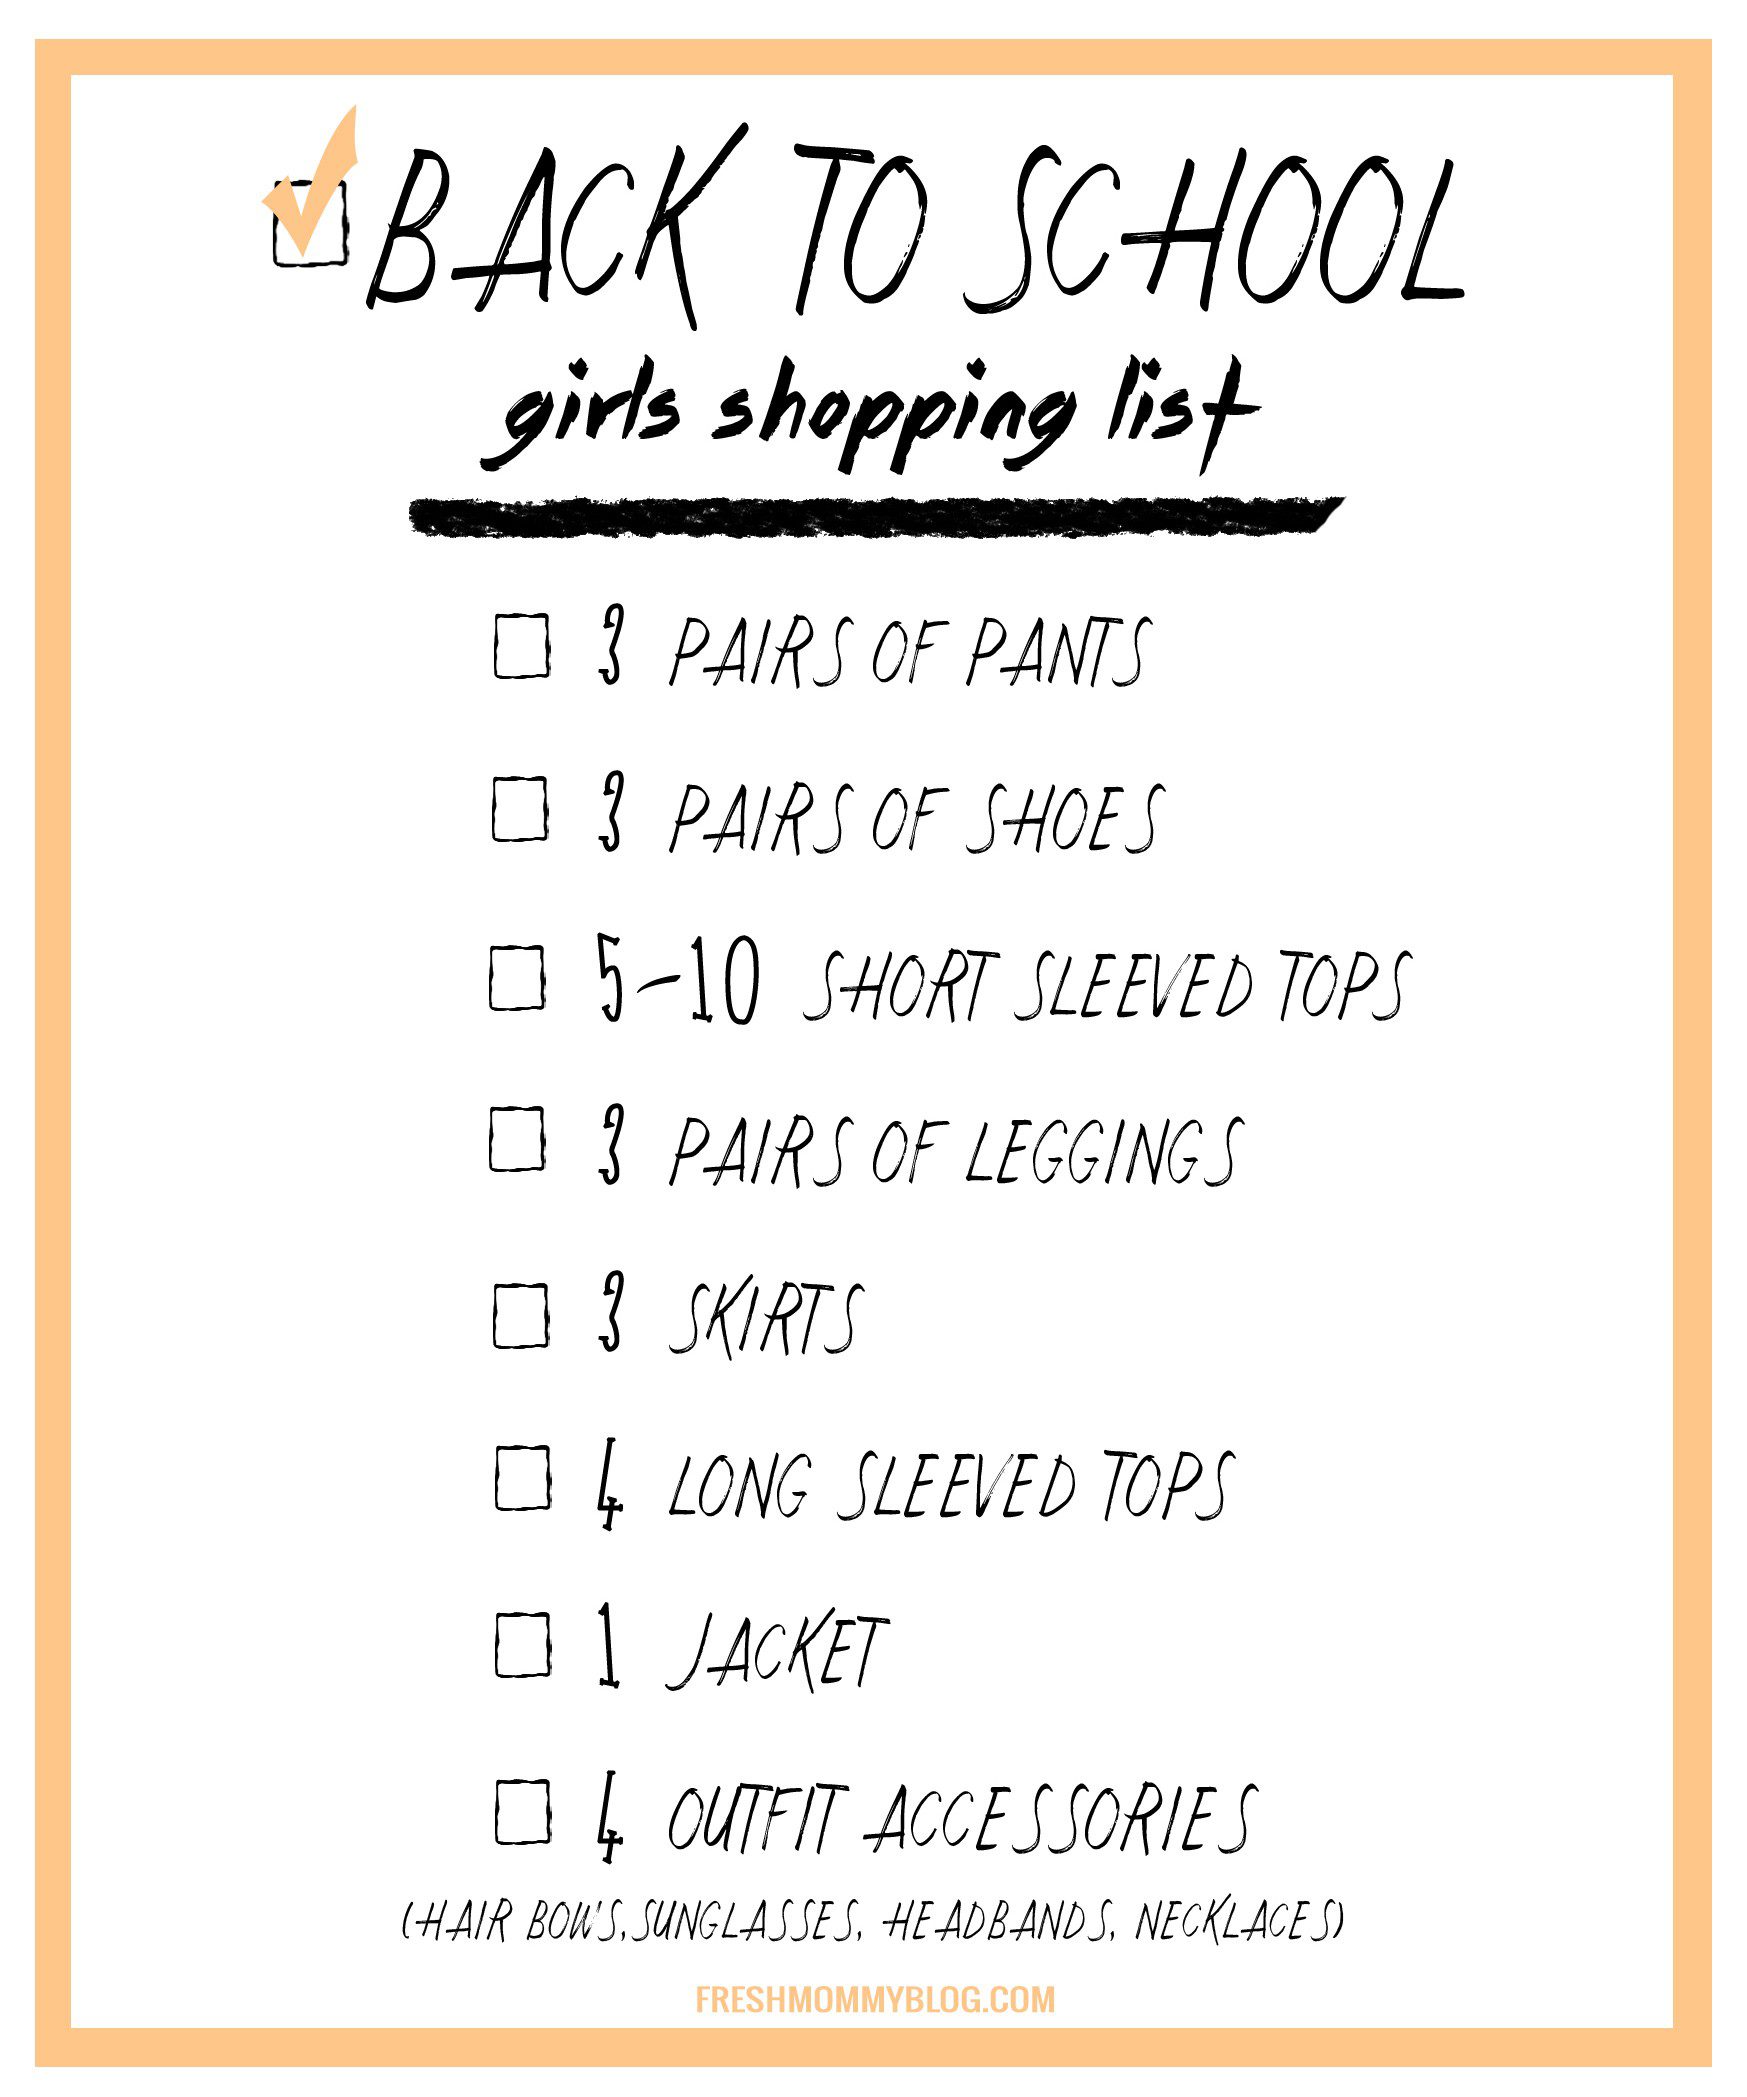 Back to School Shopping Checklist for a killer wardrobe for school. Download the list for girls.